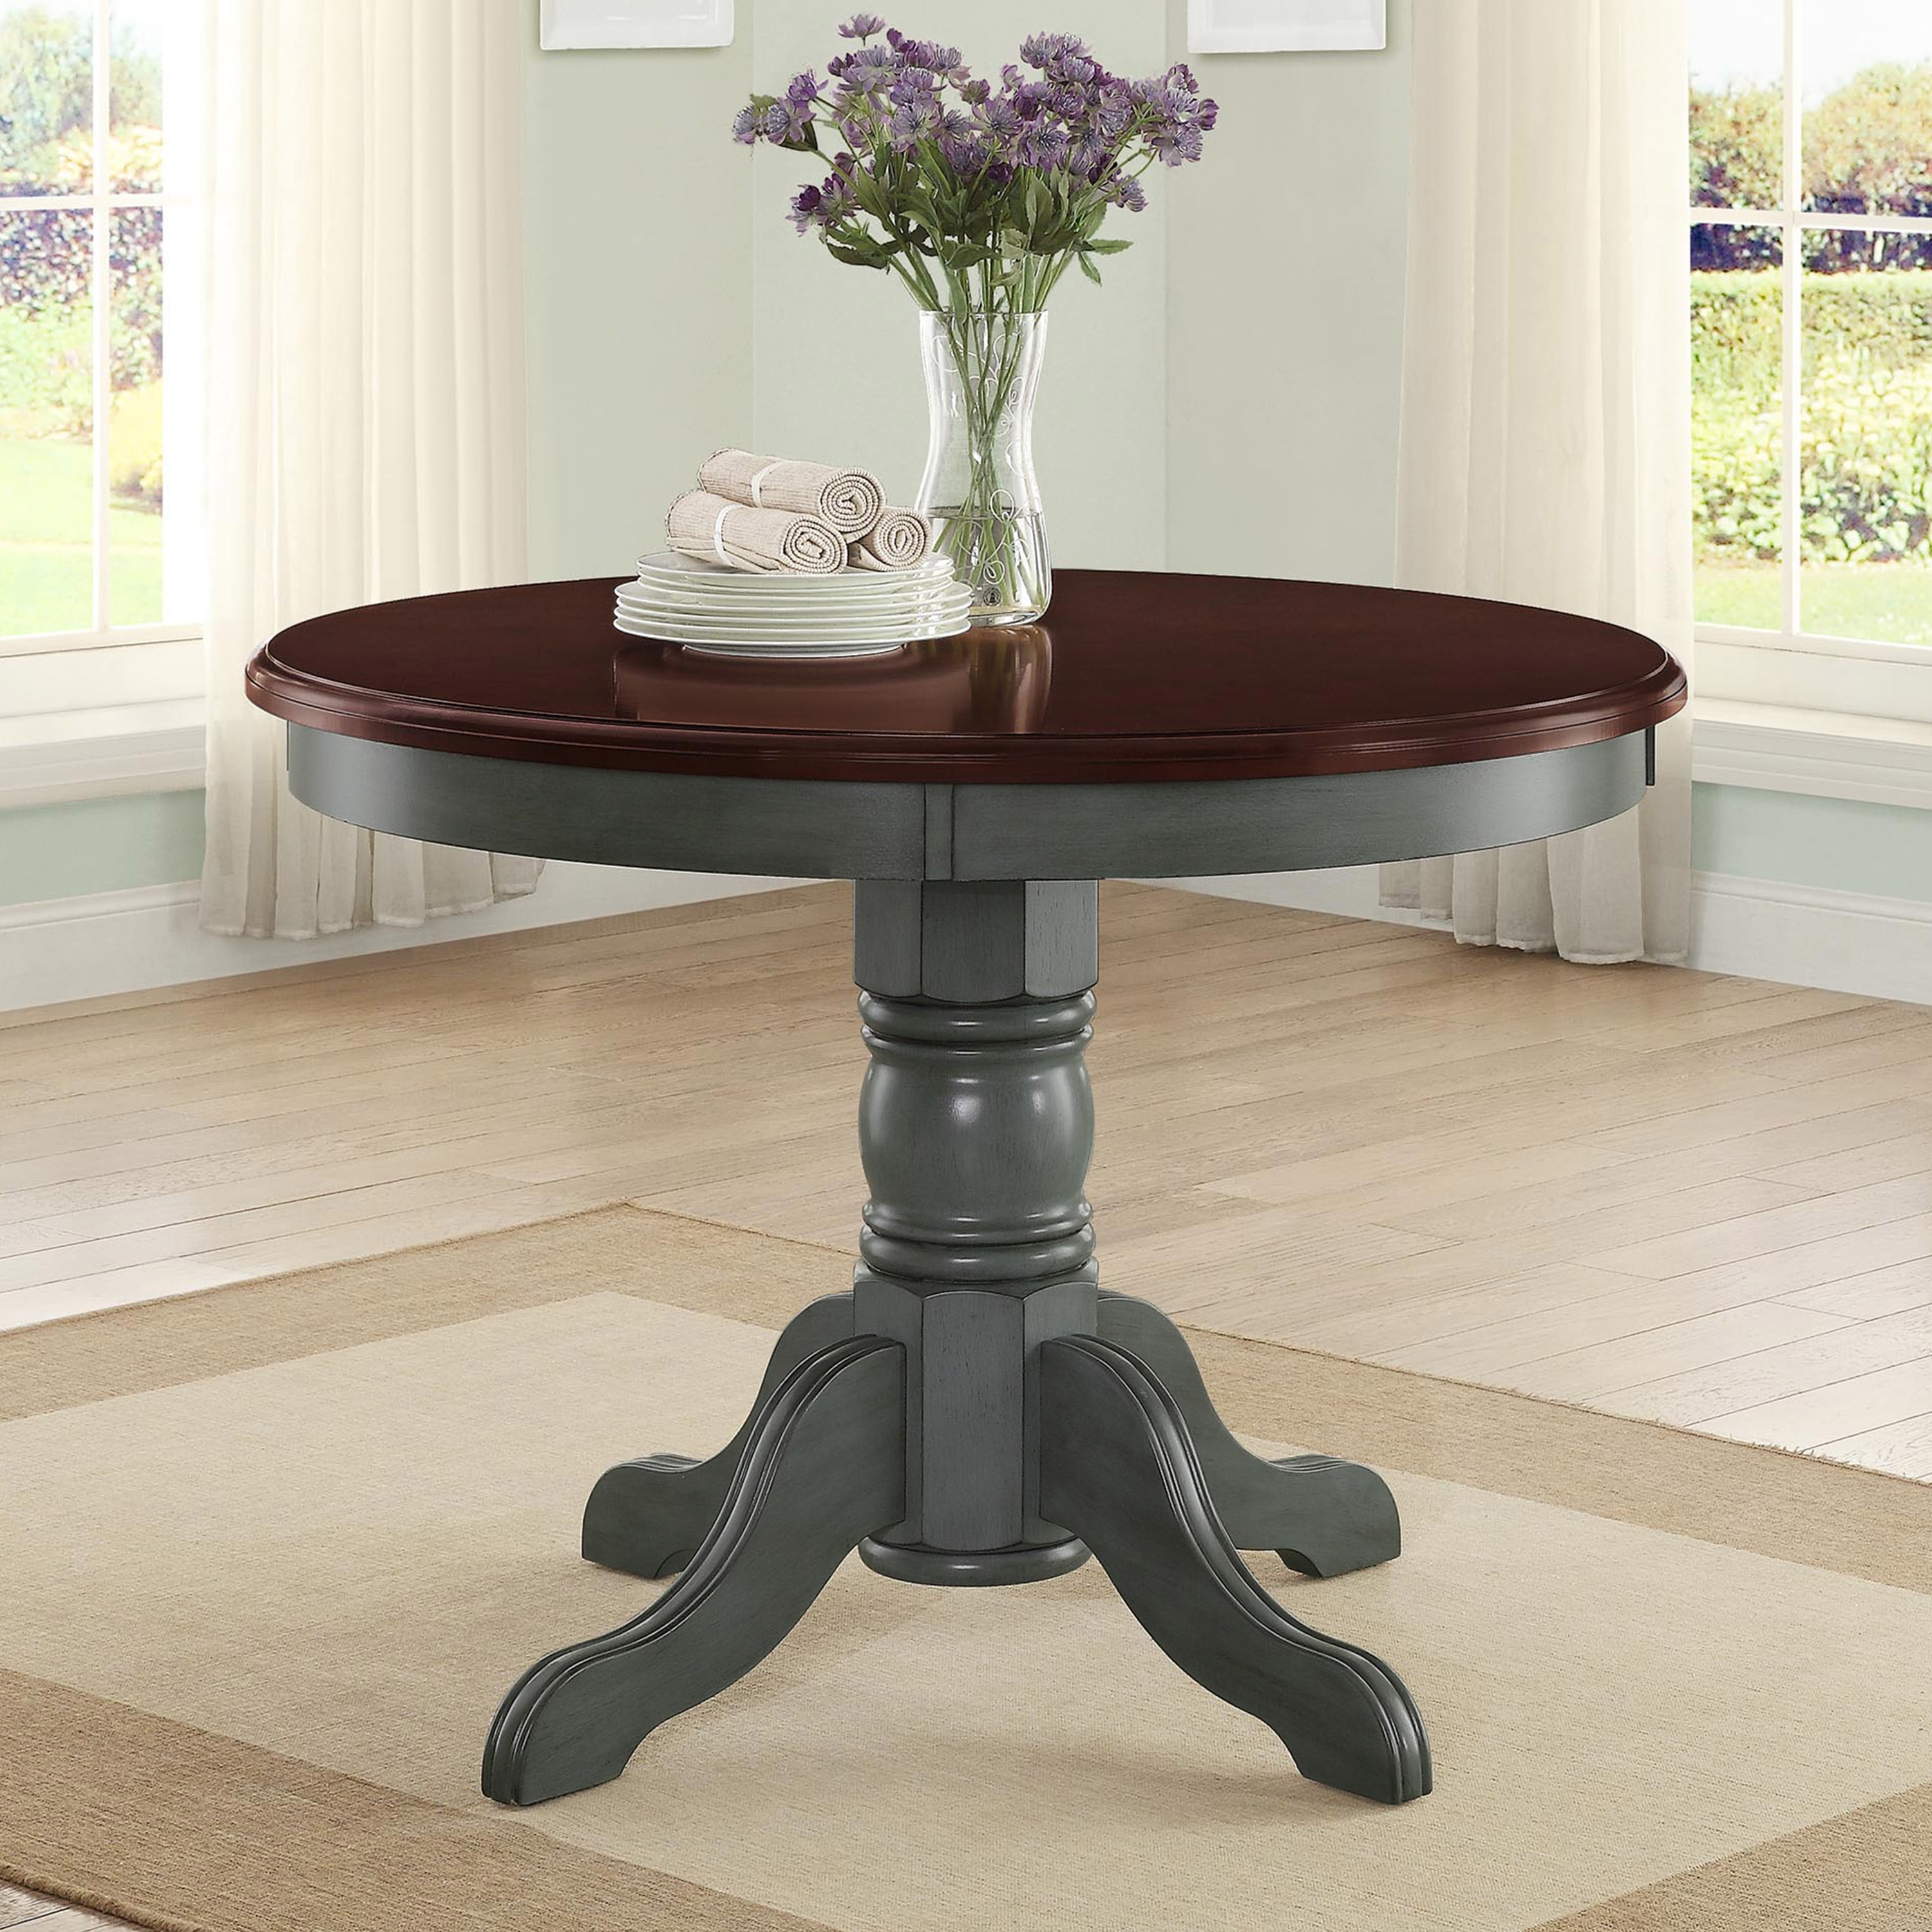 32" Round Pedestal Dining Table High Top Ped Table Kitchen Dining Room Walnut 